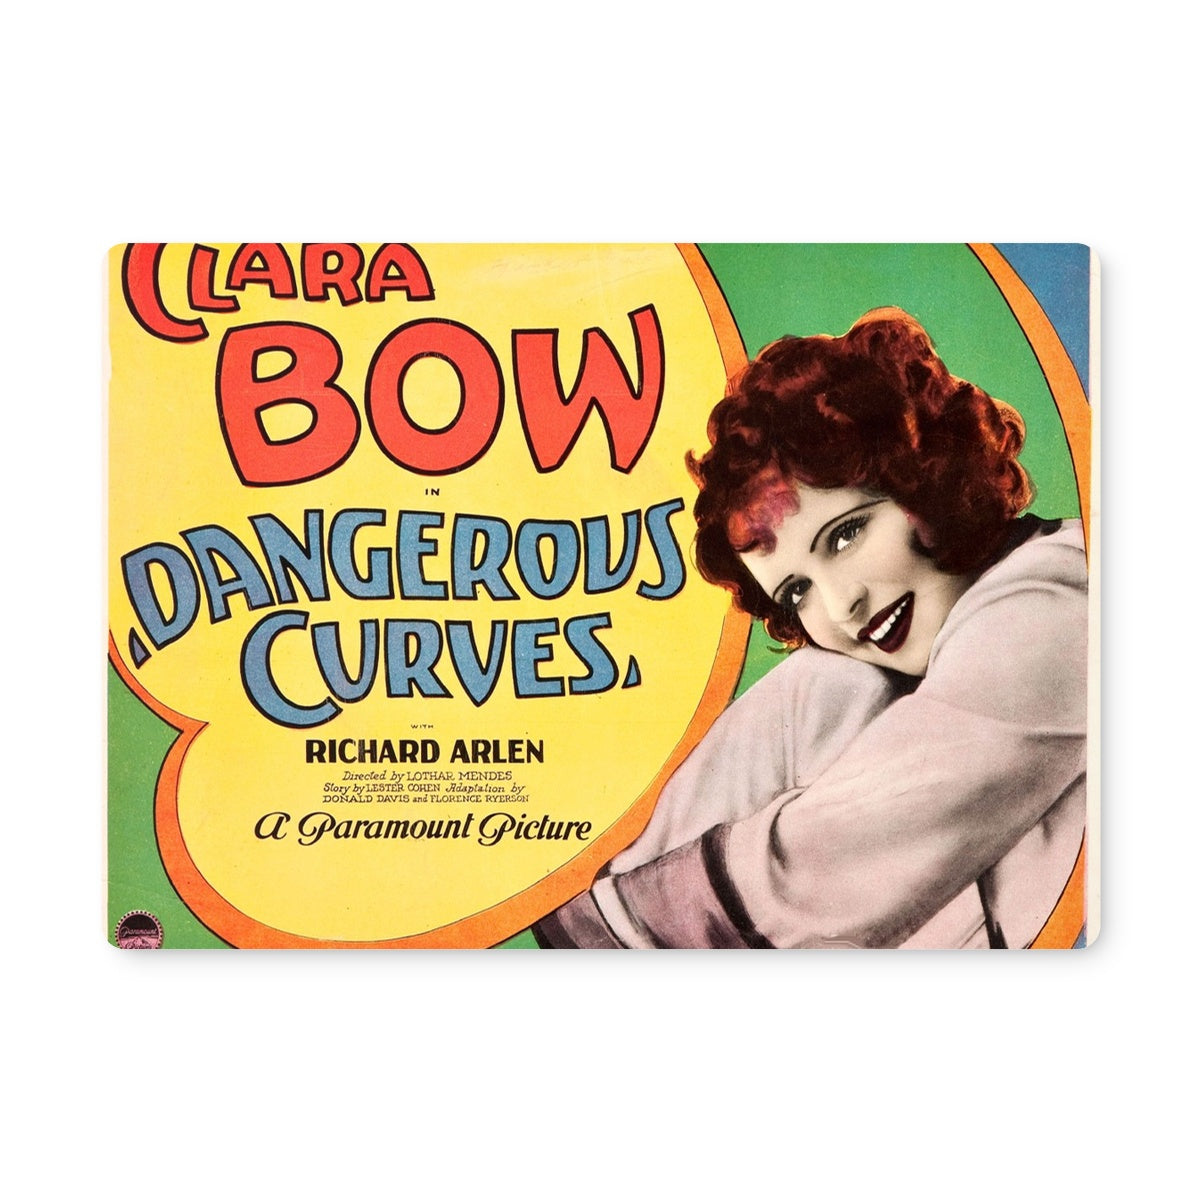 Clara Bow - Dangerous Curves Movie Poster Placemat